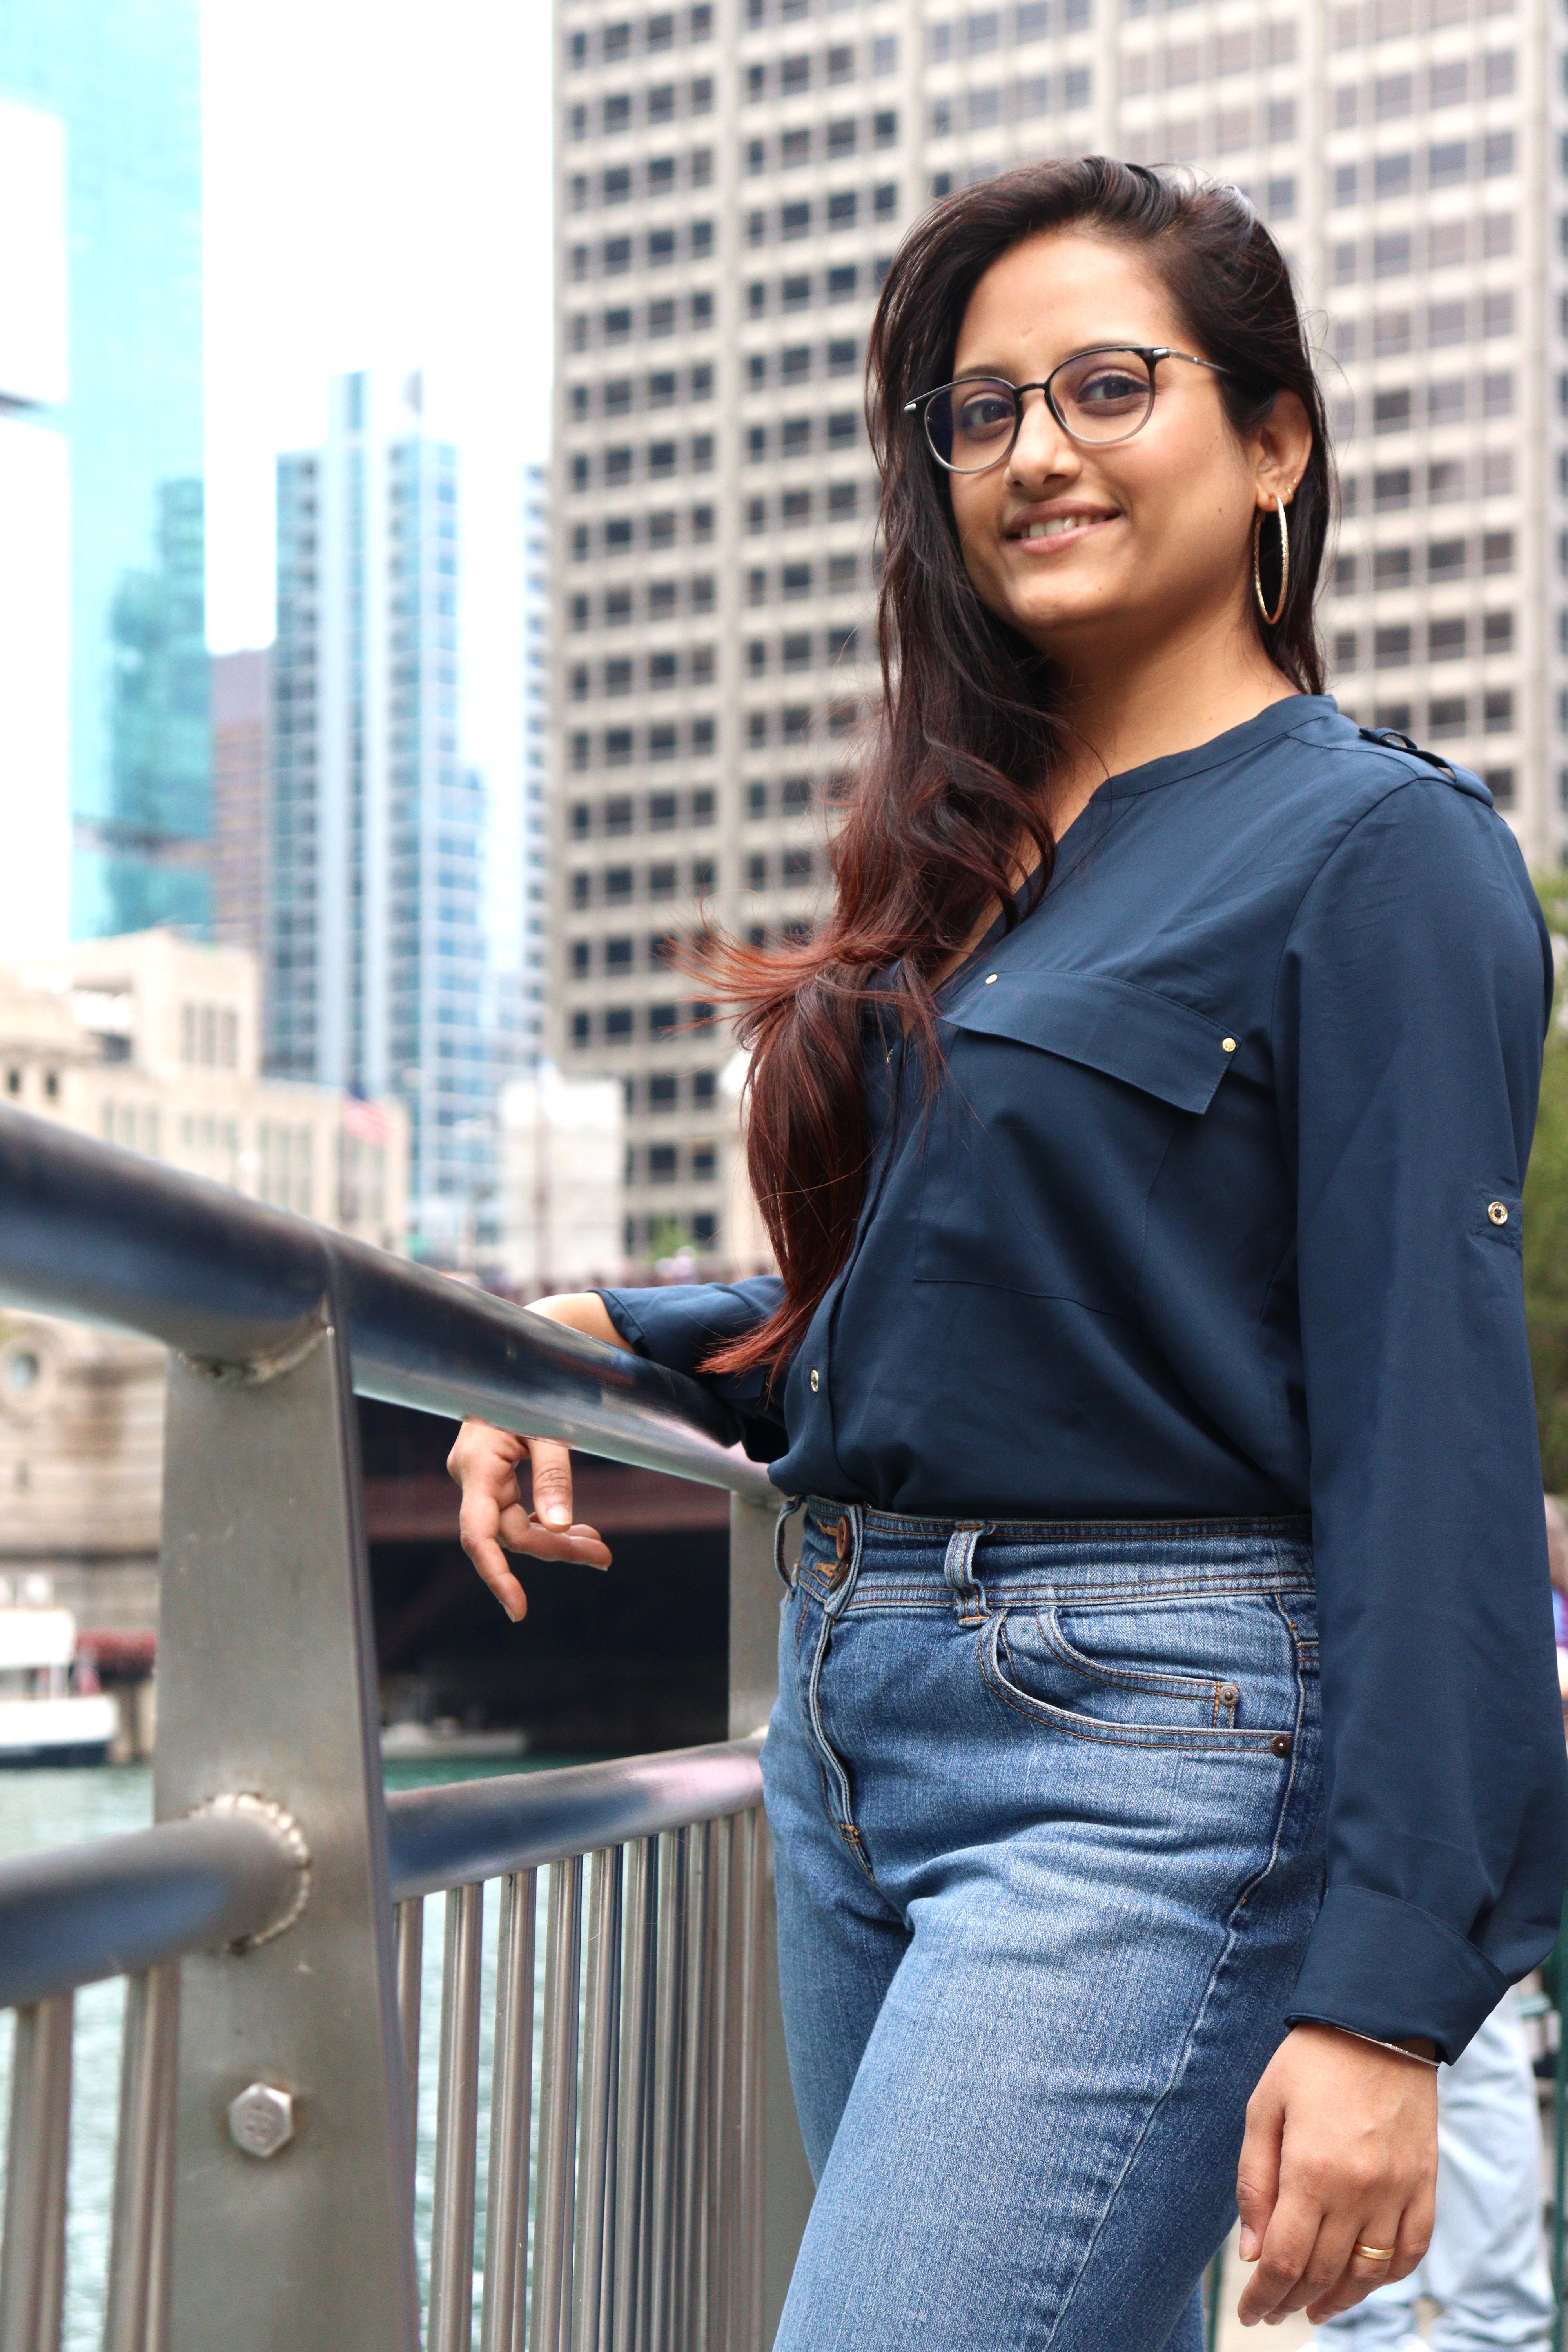 Photograph of Priyanka, wearing jeans and a blue blouse, standing in front of a river in an urban setting, with her arm over a railing.